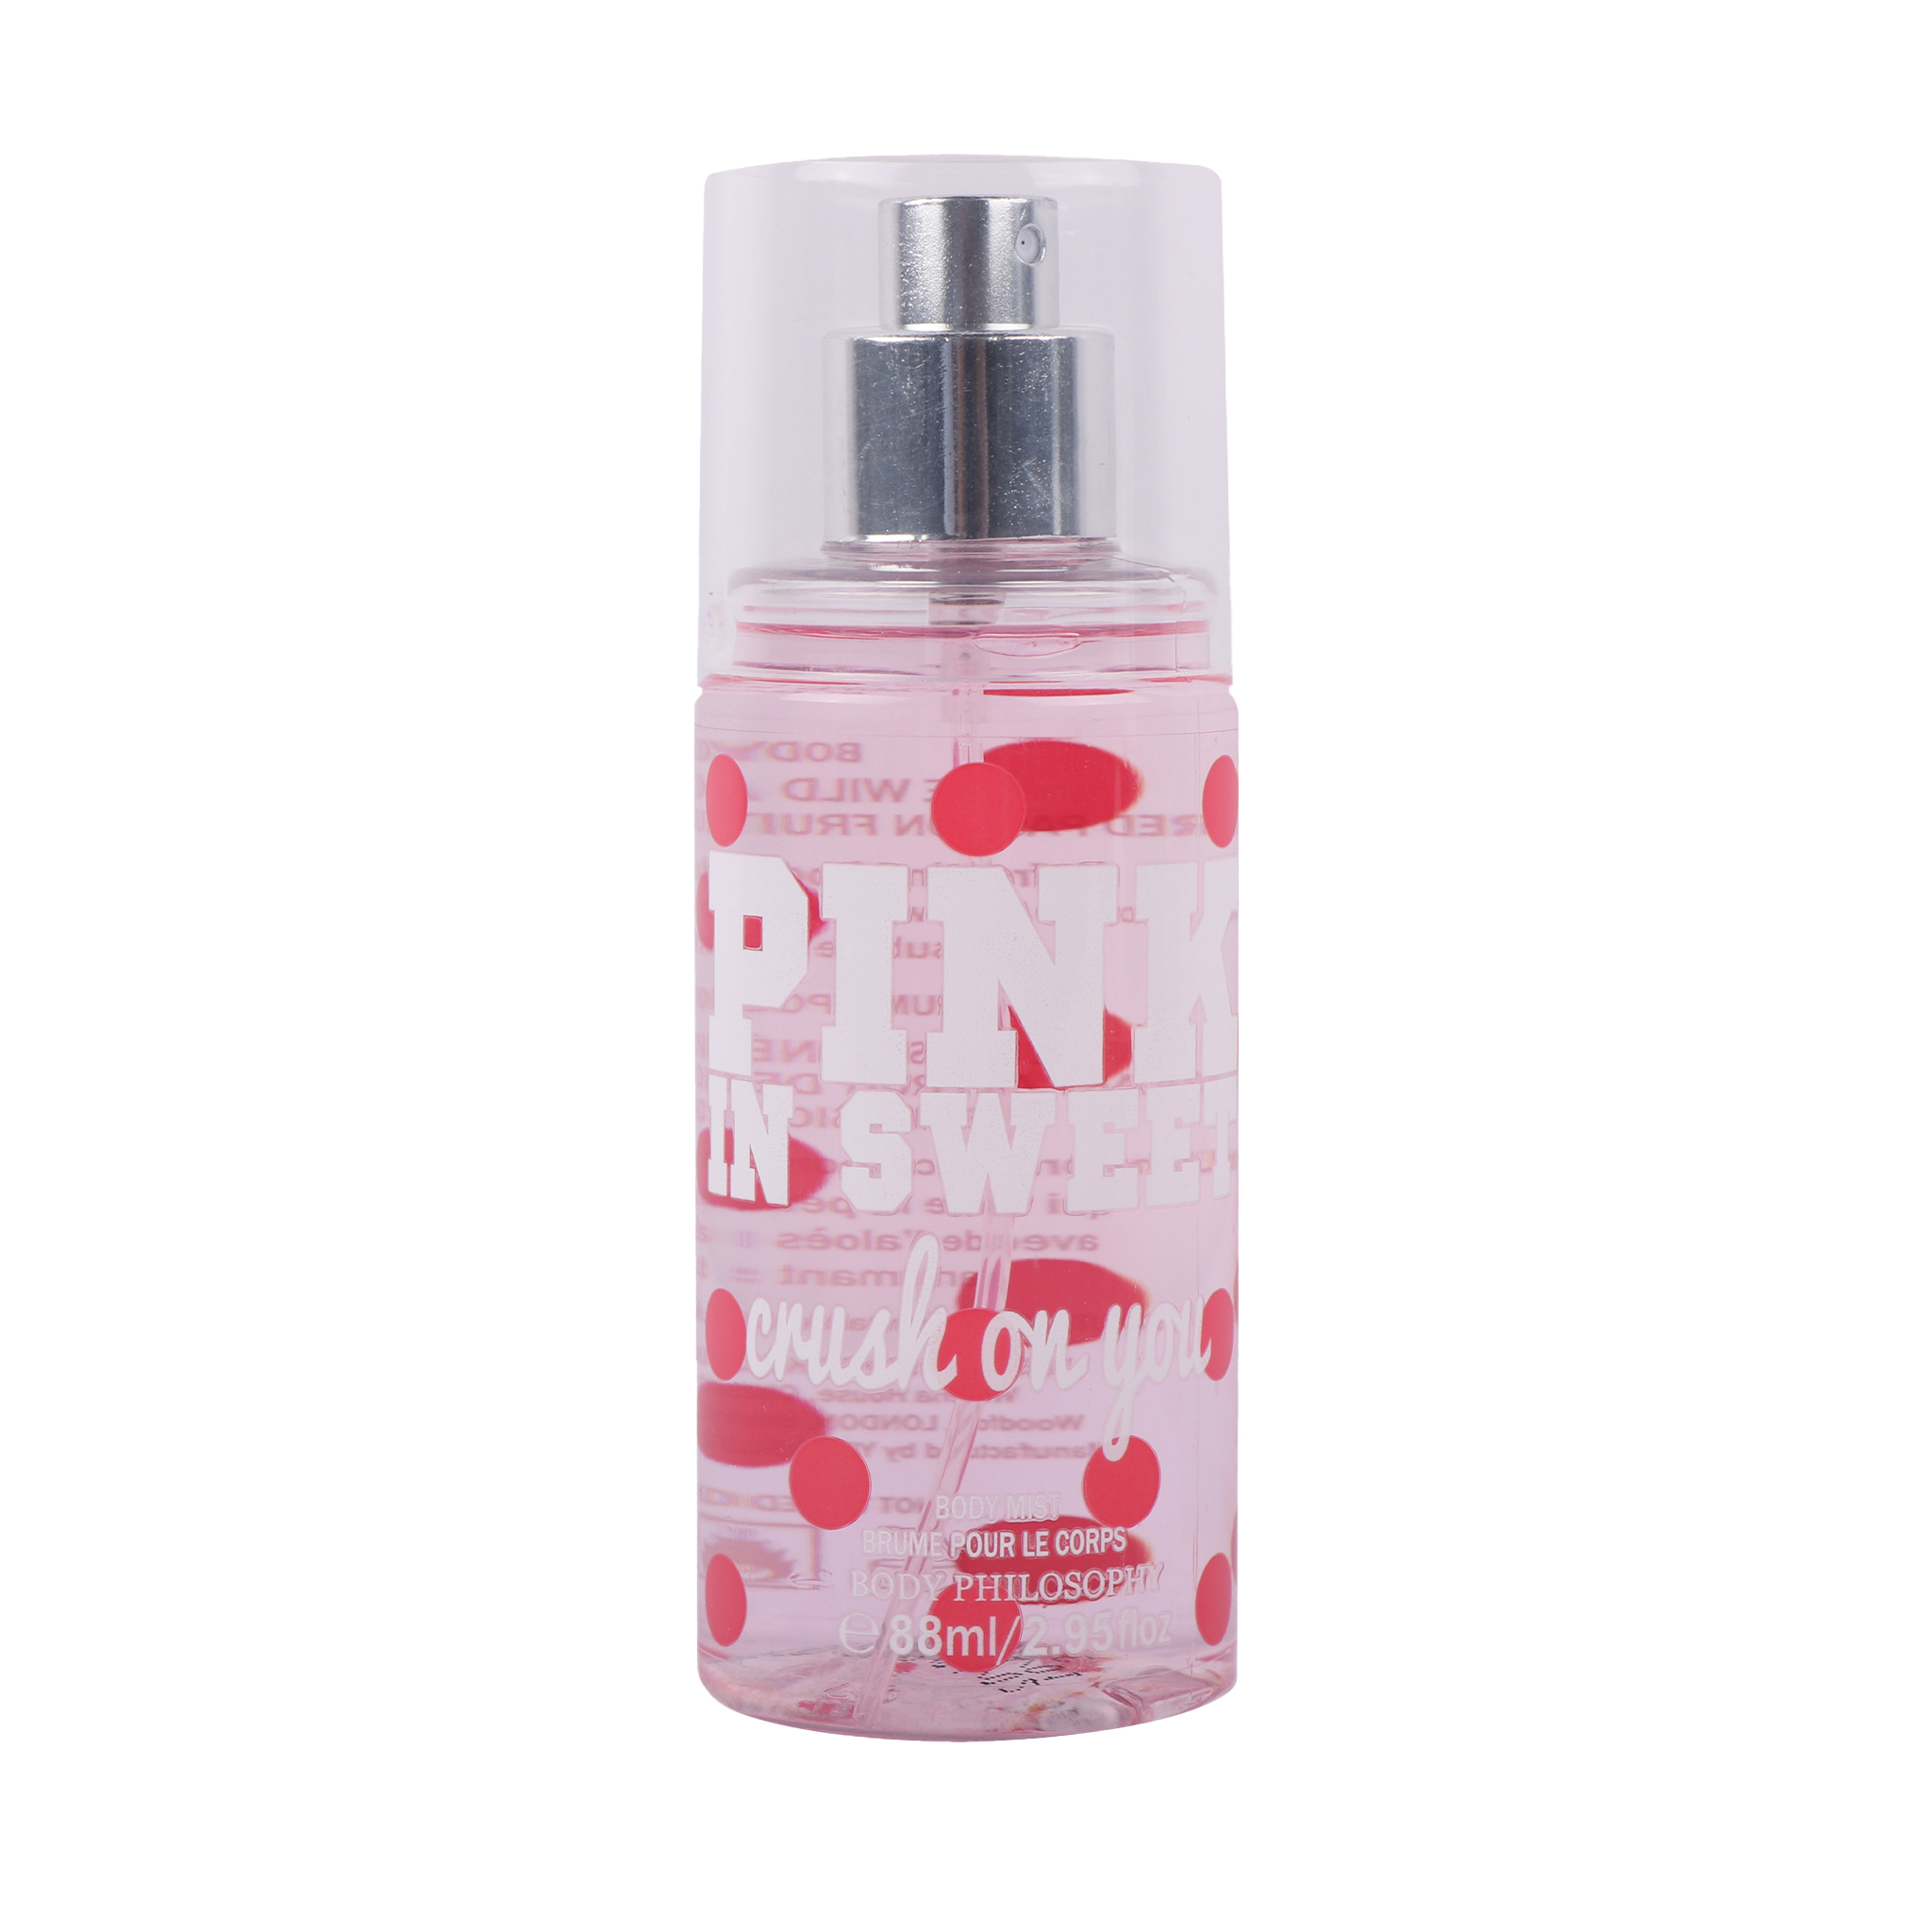 Pink In Sweet Crush On You Scented Mist 75ml - 1Sell